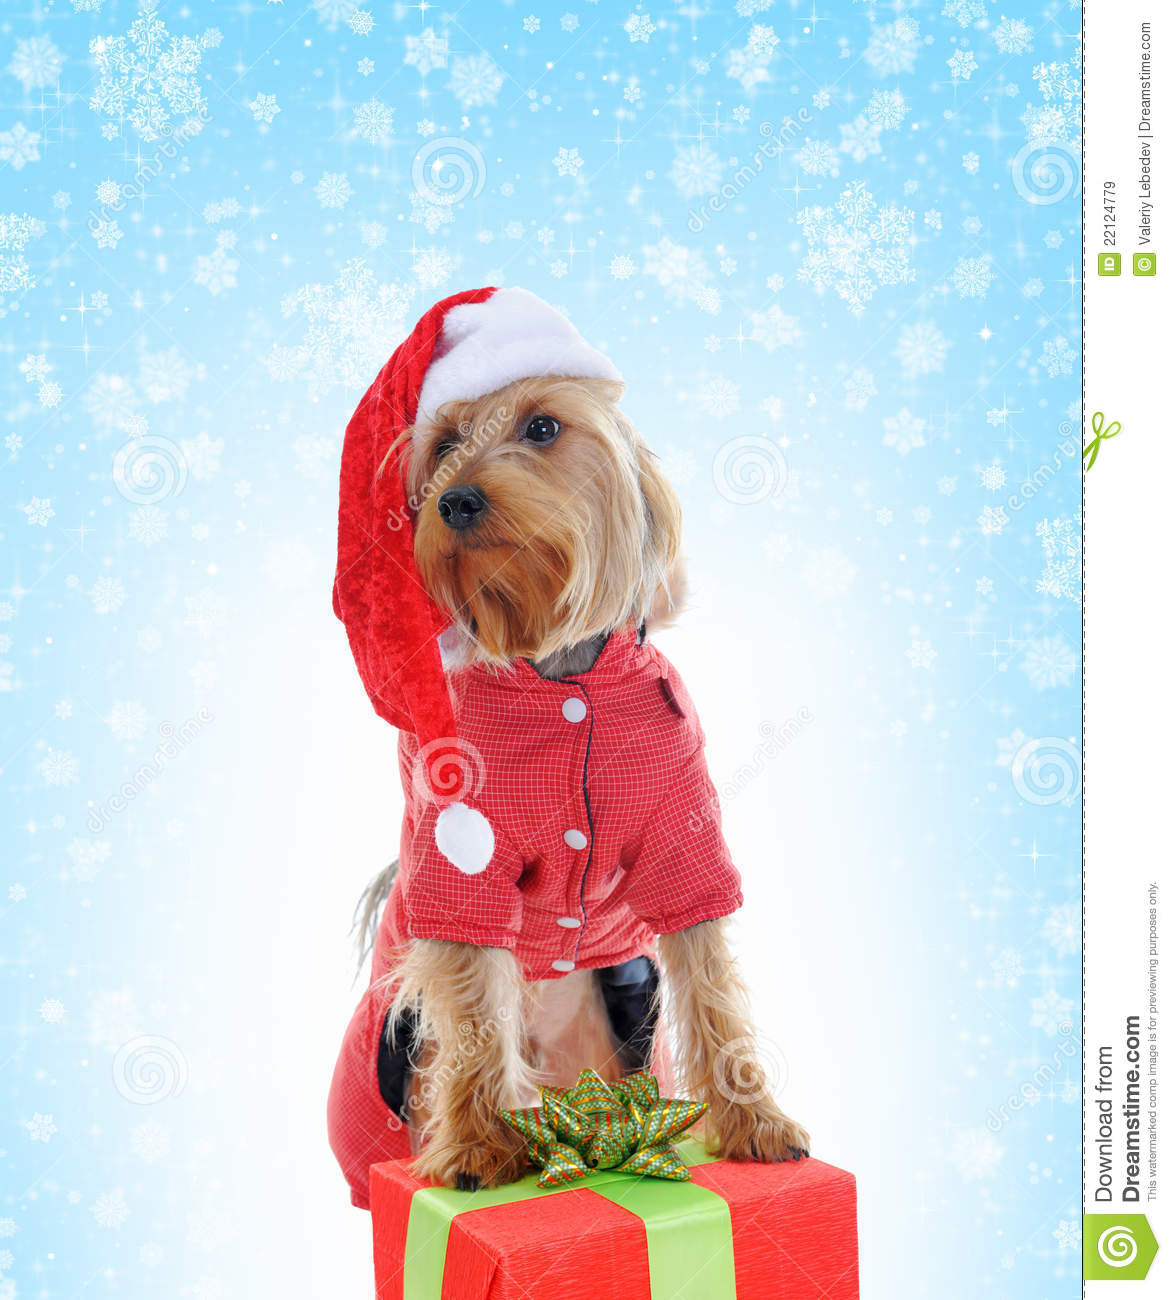 Christmas Yorkie Royalty Free Stock Images   Image  22124779